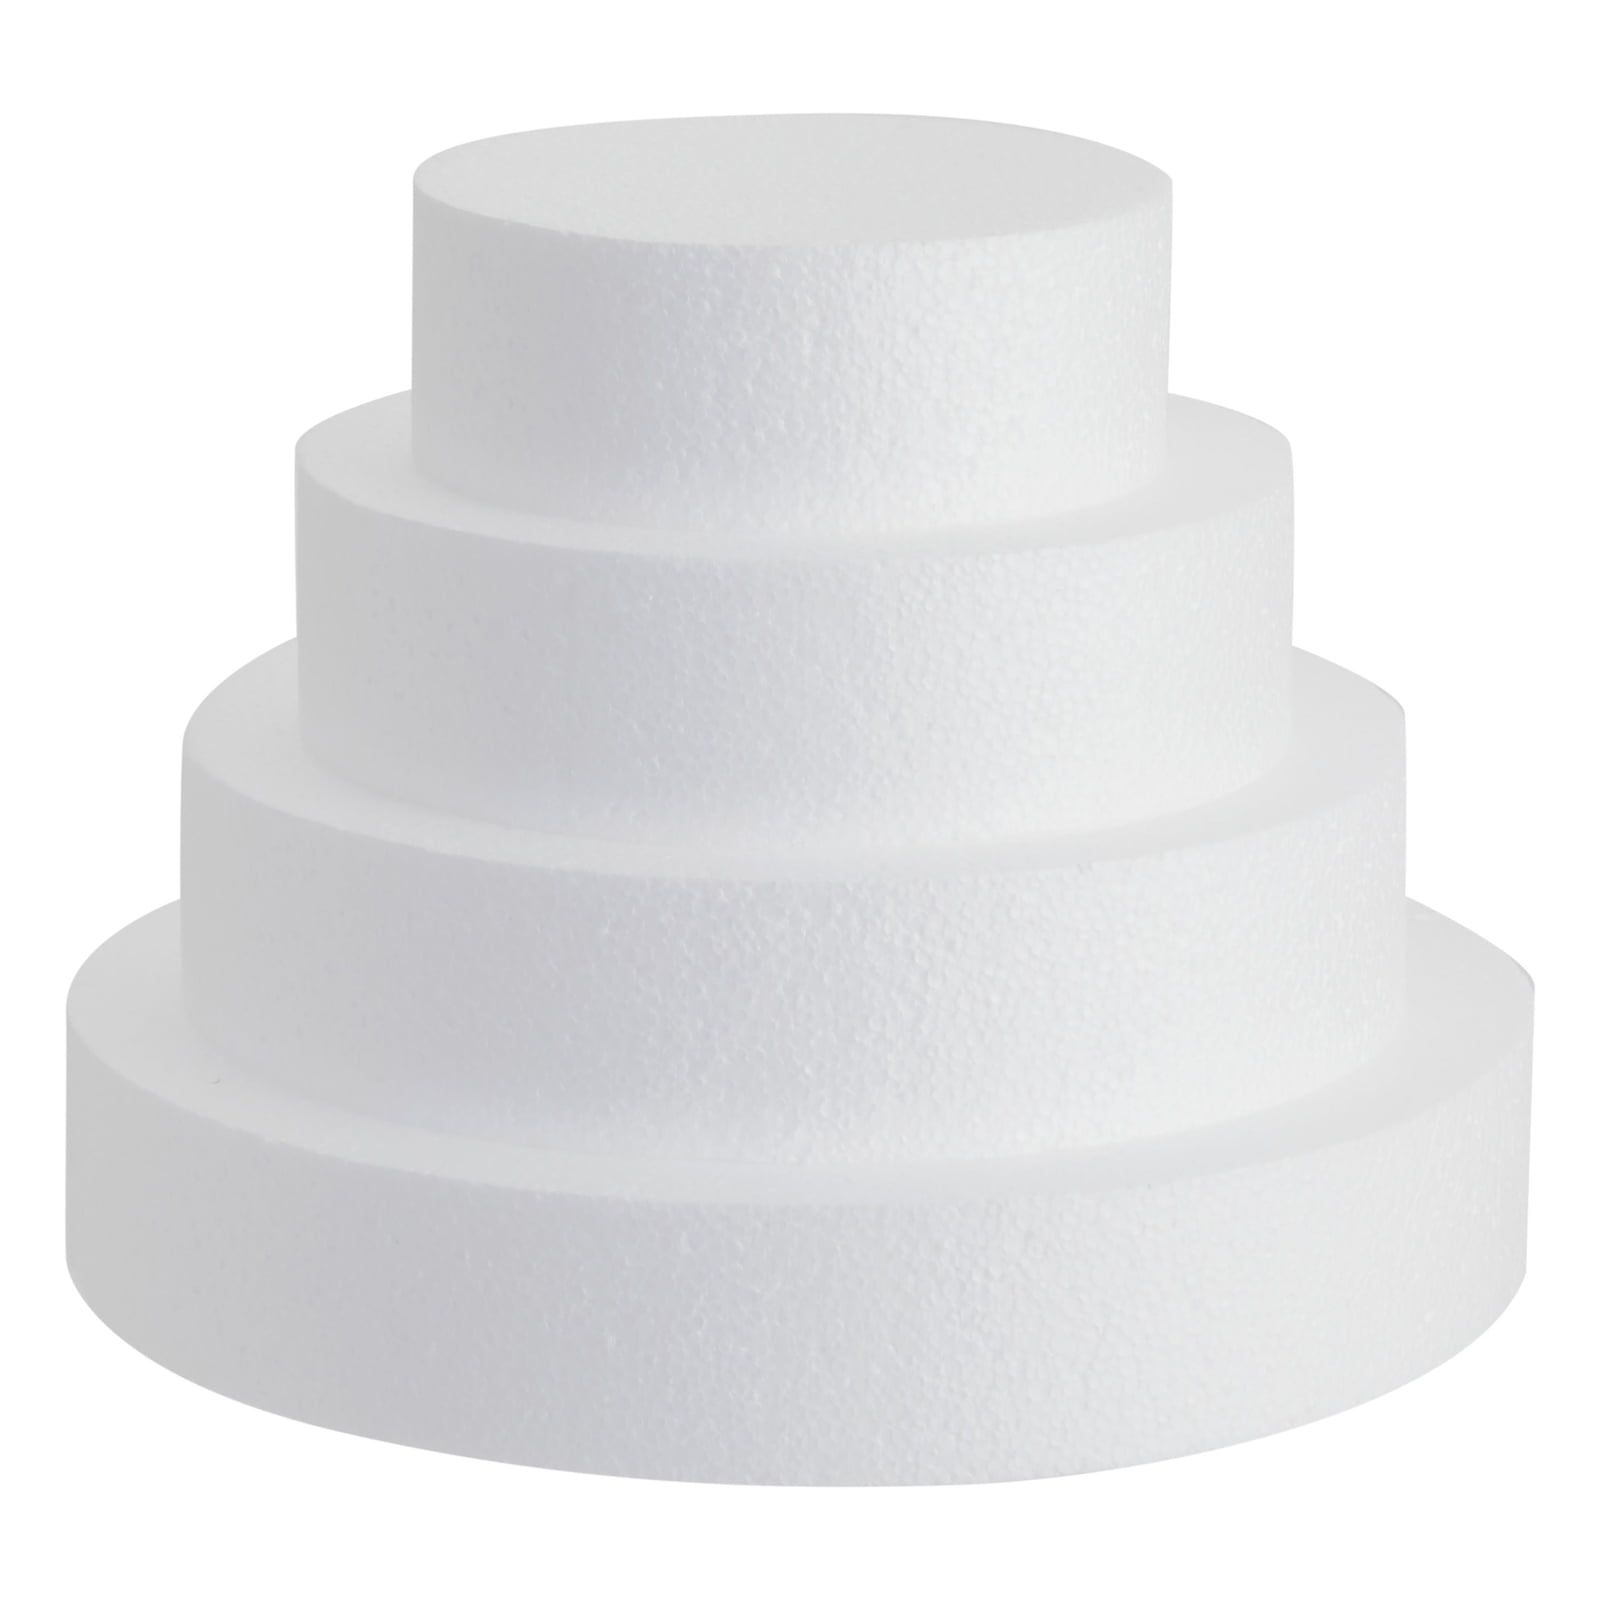 Alternating Size Tiers Wedding Cake Help! - CakeCentral.com